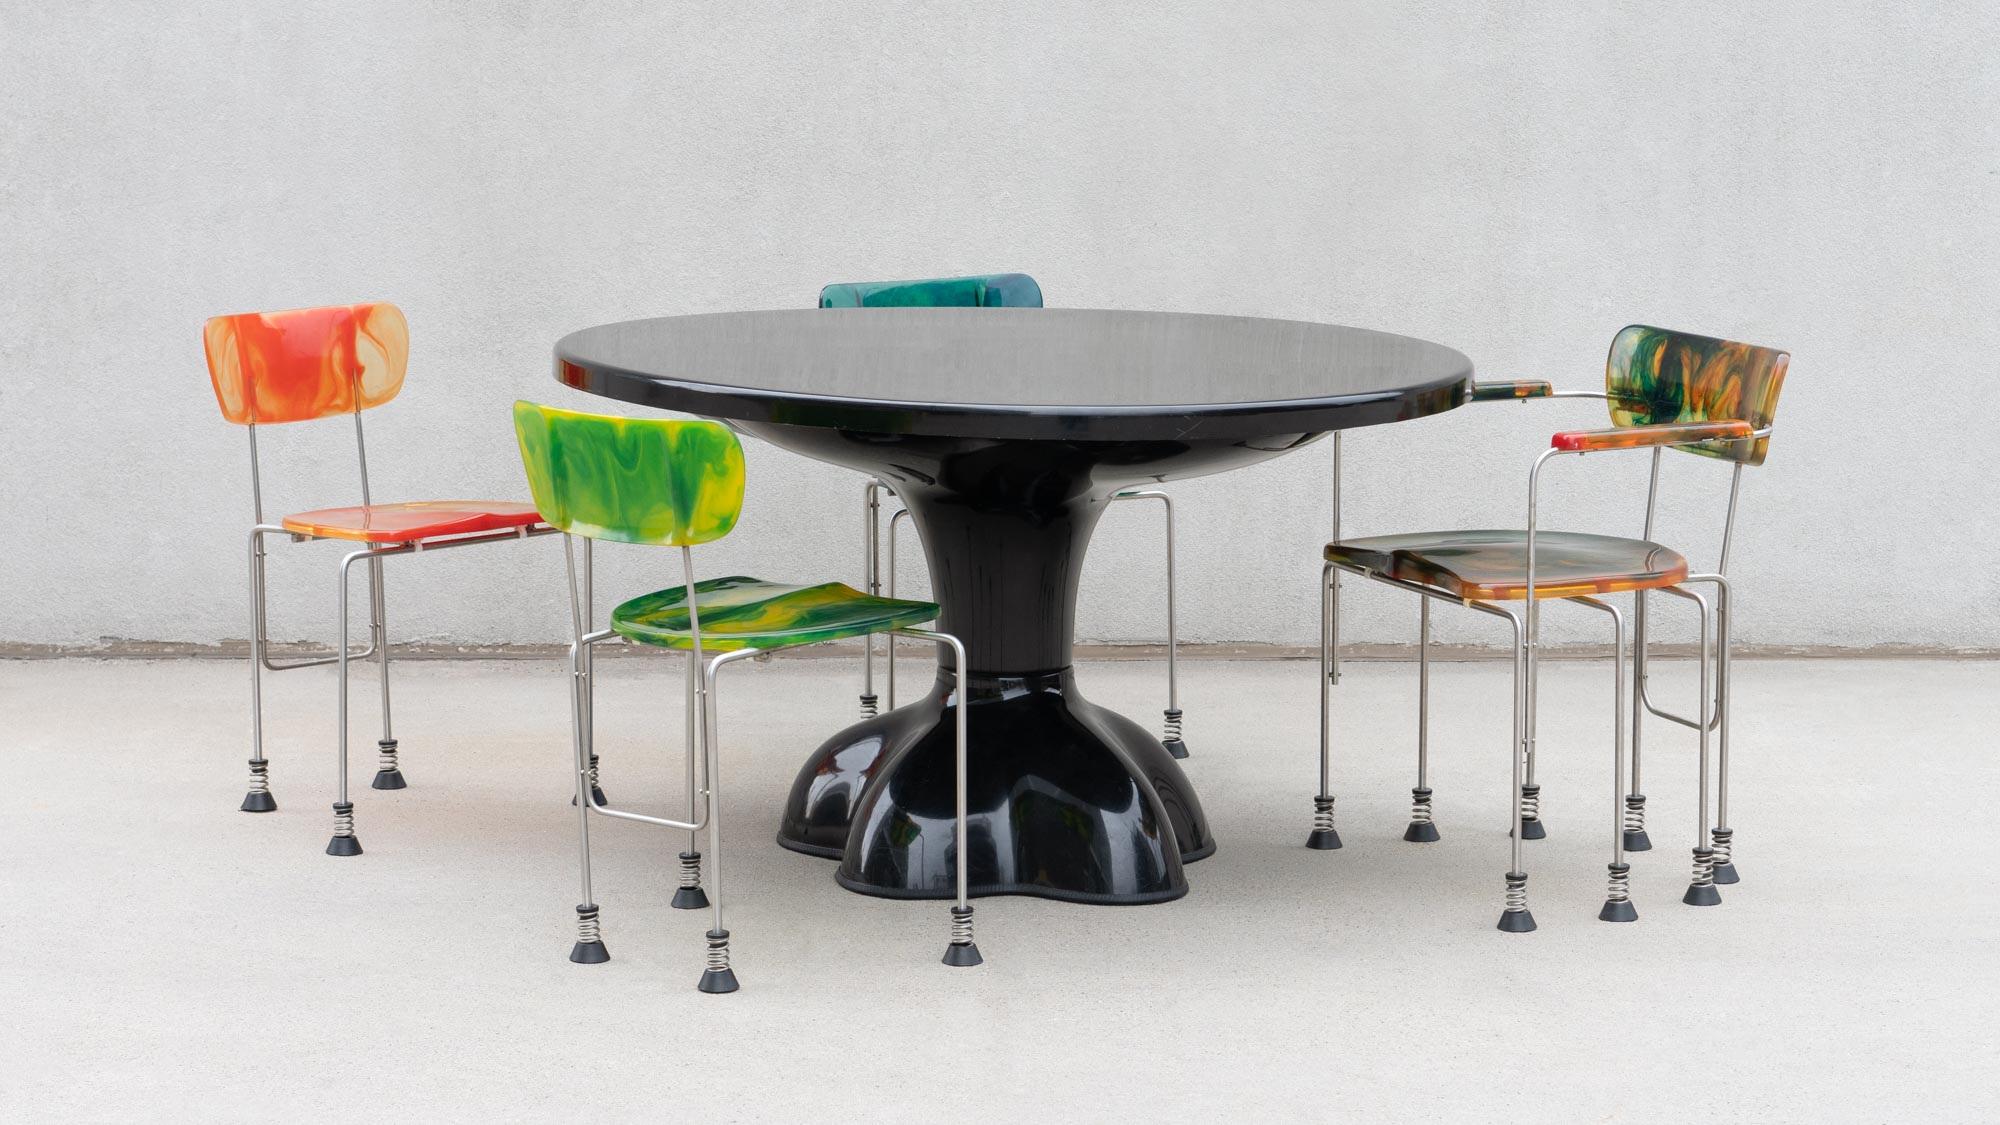 MOLAR DINING TABLE
WENDELL CASTLE C.1969

Seldom seen ‘Molar’ Dining Table in black designed by Wendell Castle. Gel-coated, molded fiberglass in an amorphous shape. The original rubber trim is present on the bottom. 

Seats 6.

From Wendell Castle